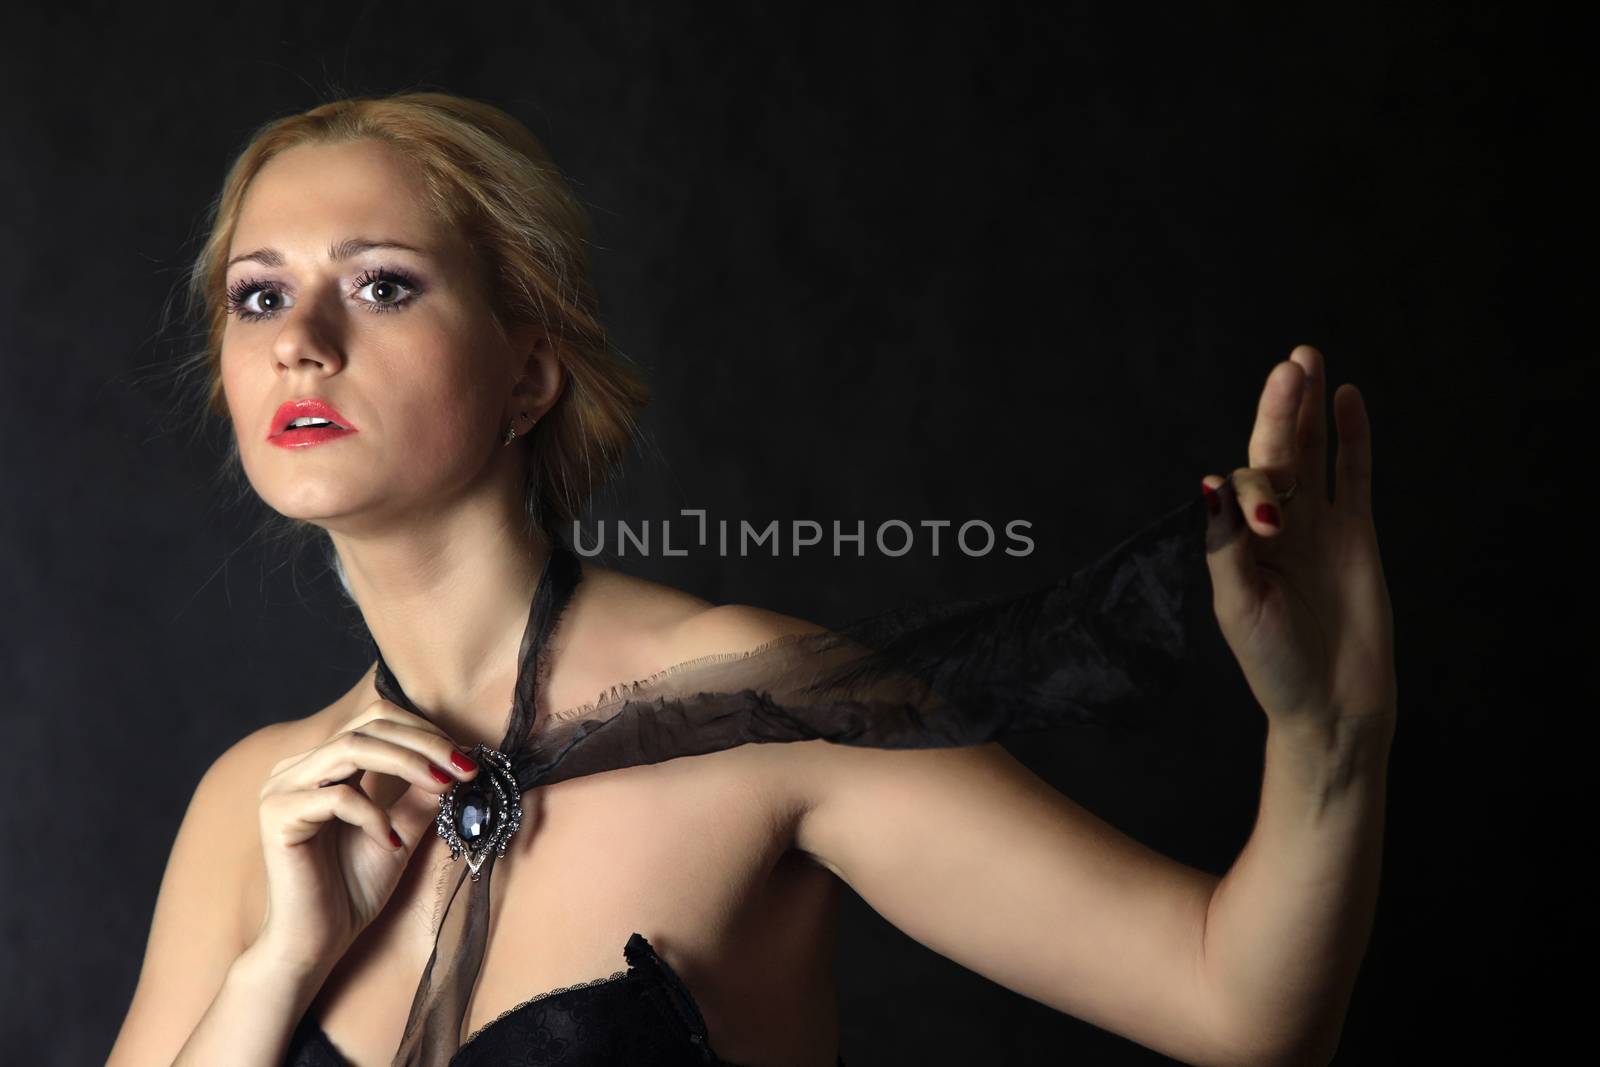 Beautiful young blond woman portrait in studio